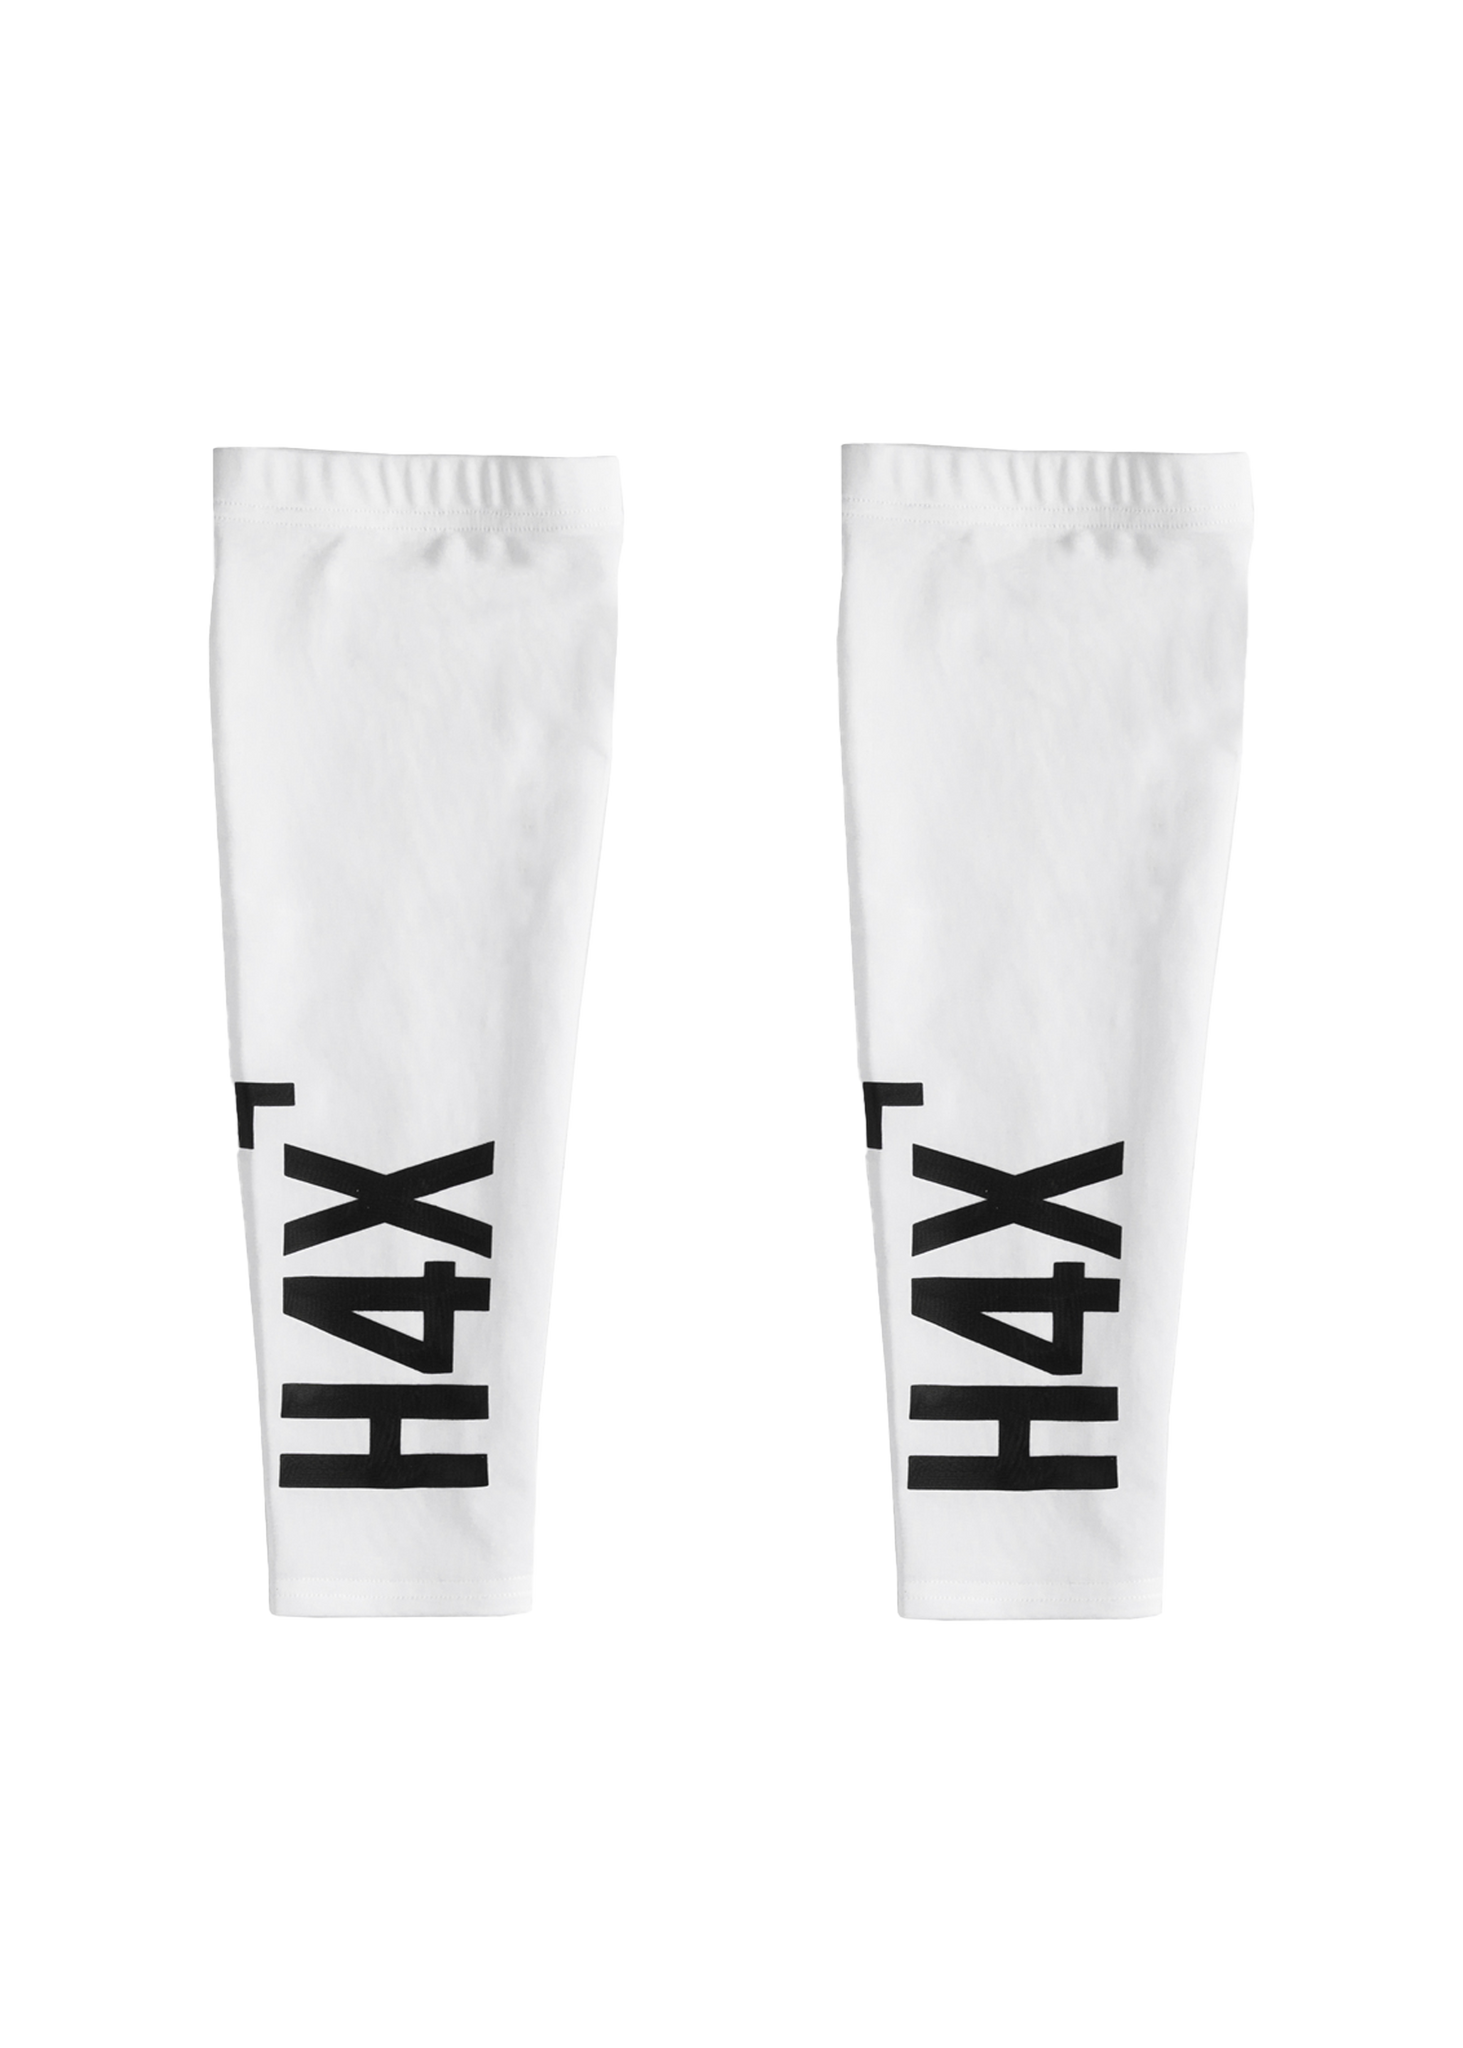 H4X PRO SLEEVES  Sleeves, Clothes design, Man shop